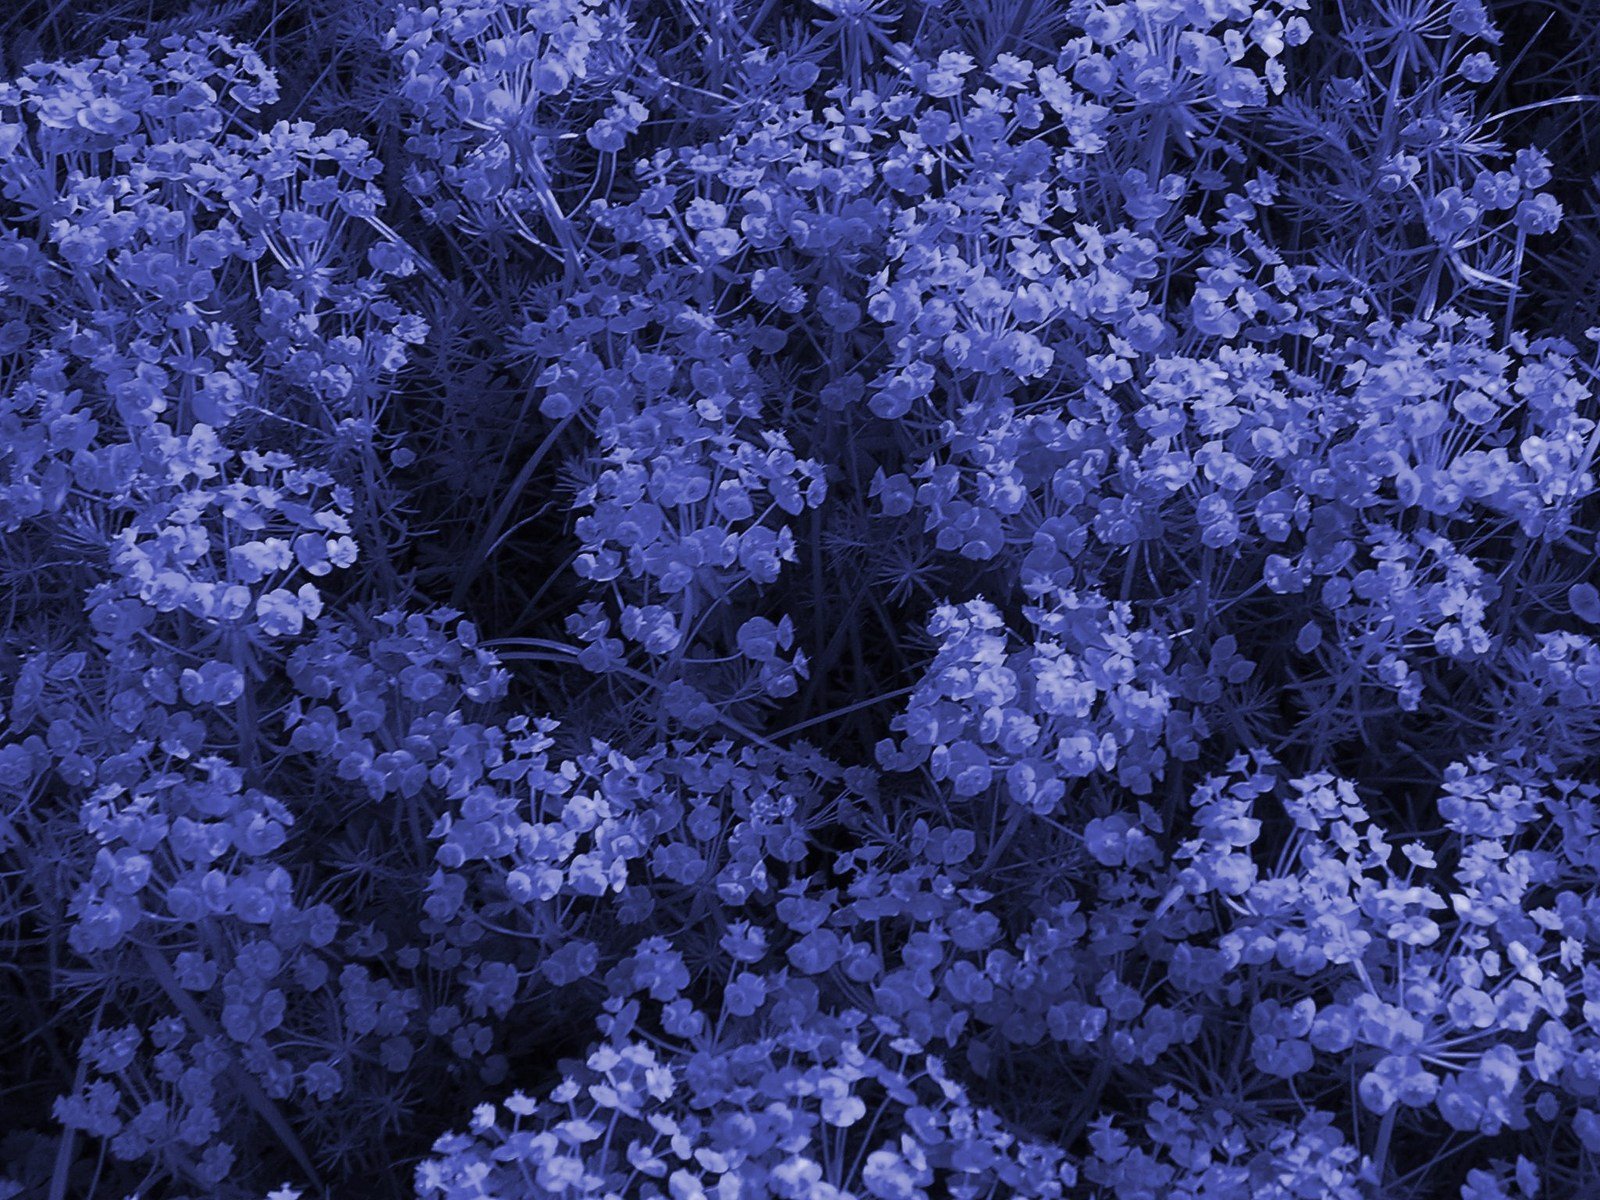 an image of purple flowers in the ground